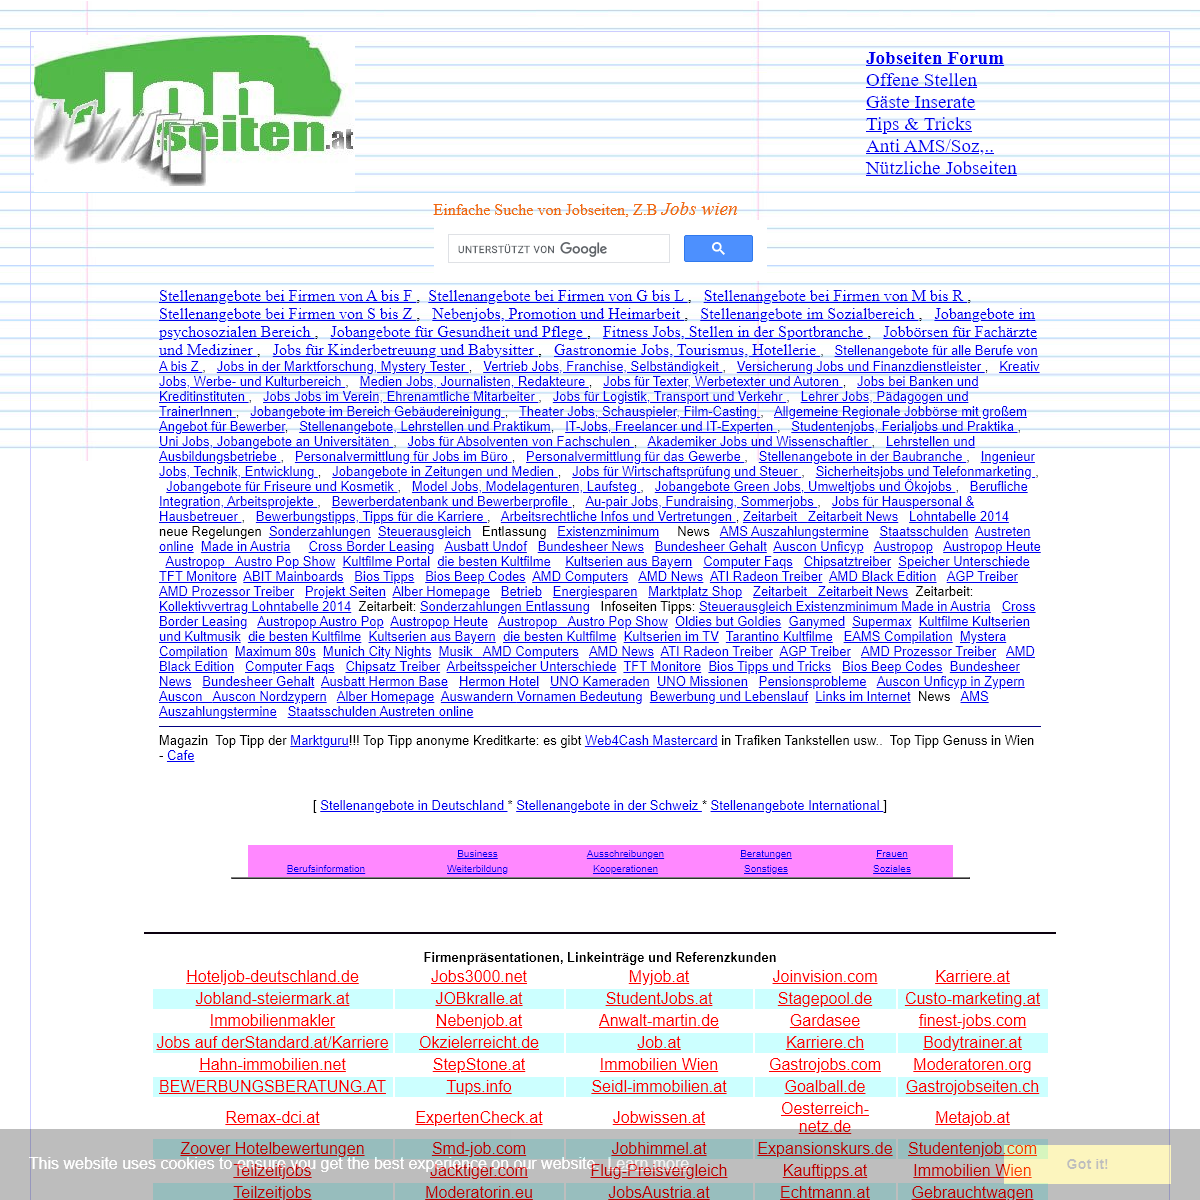 A complete backup of jobseiten.at